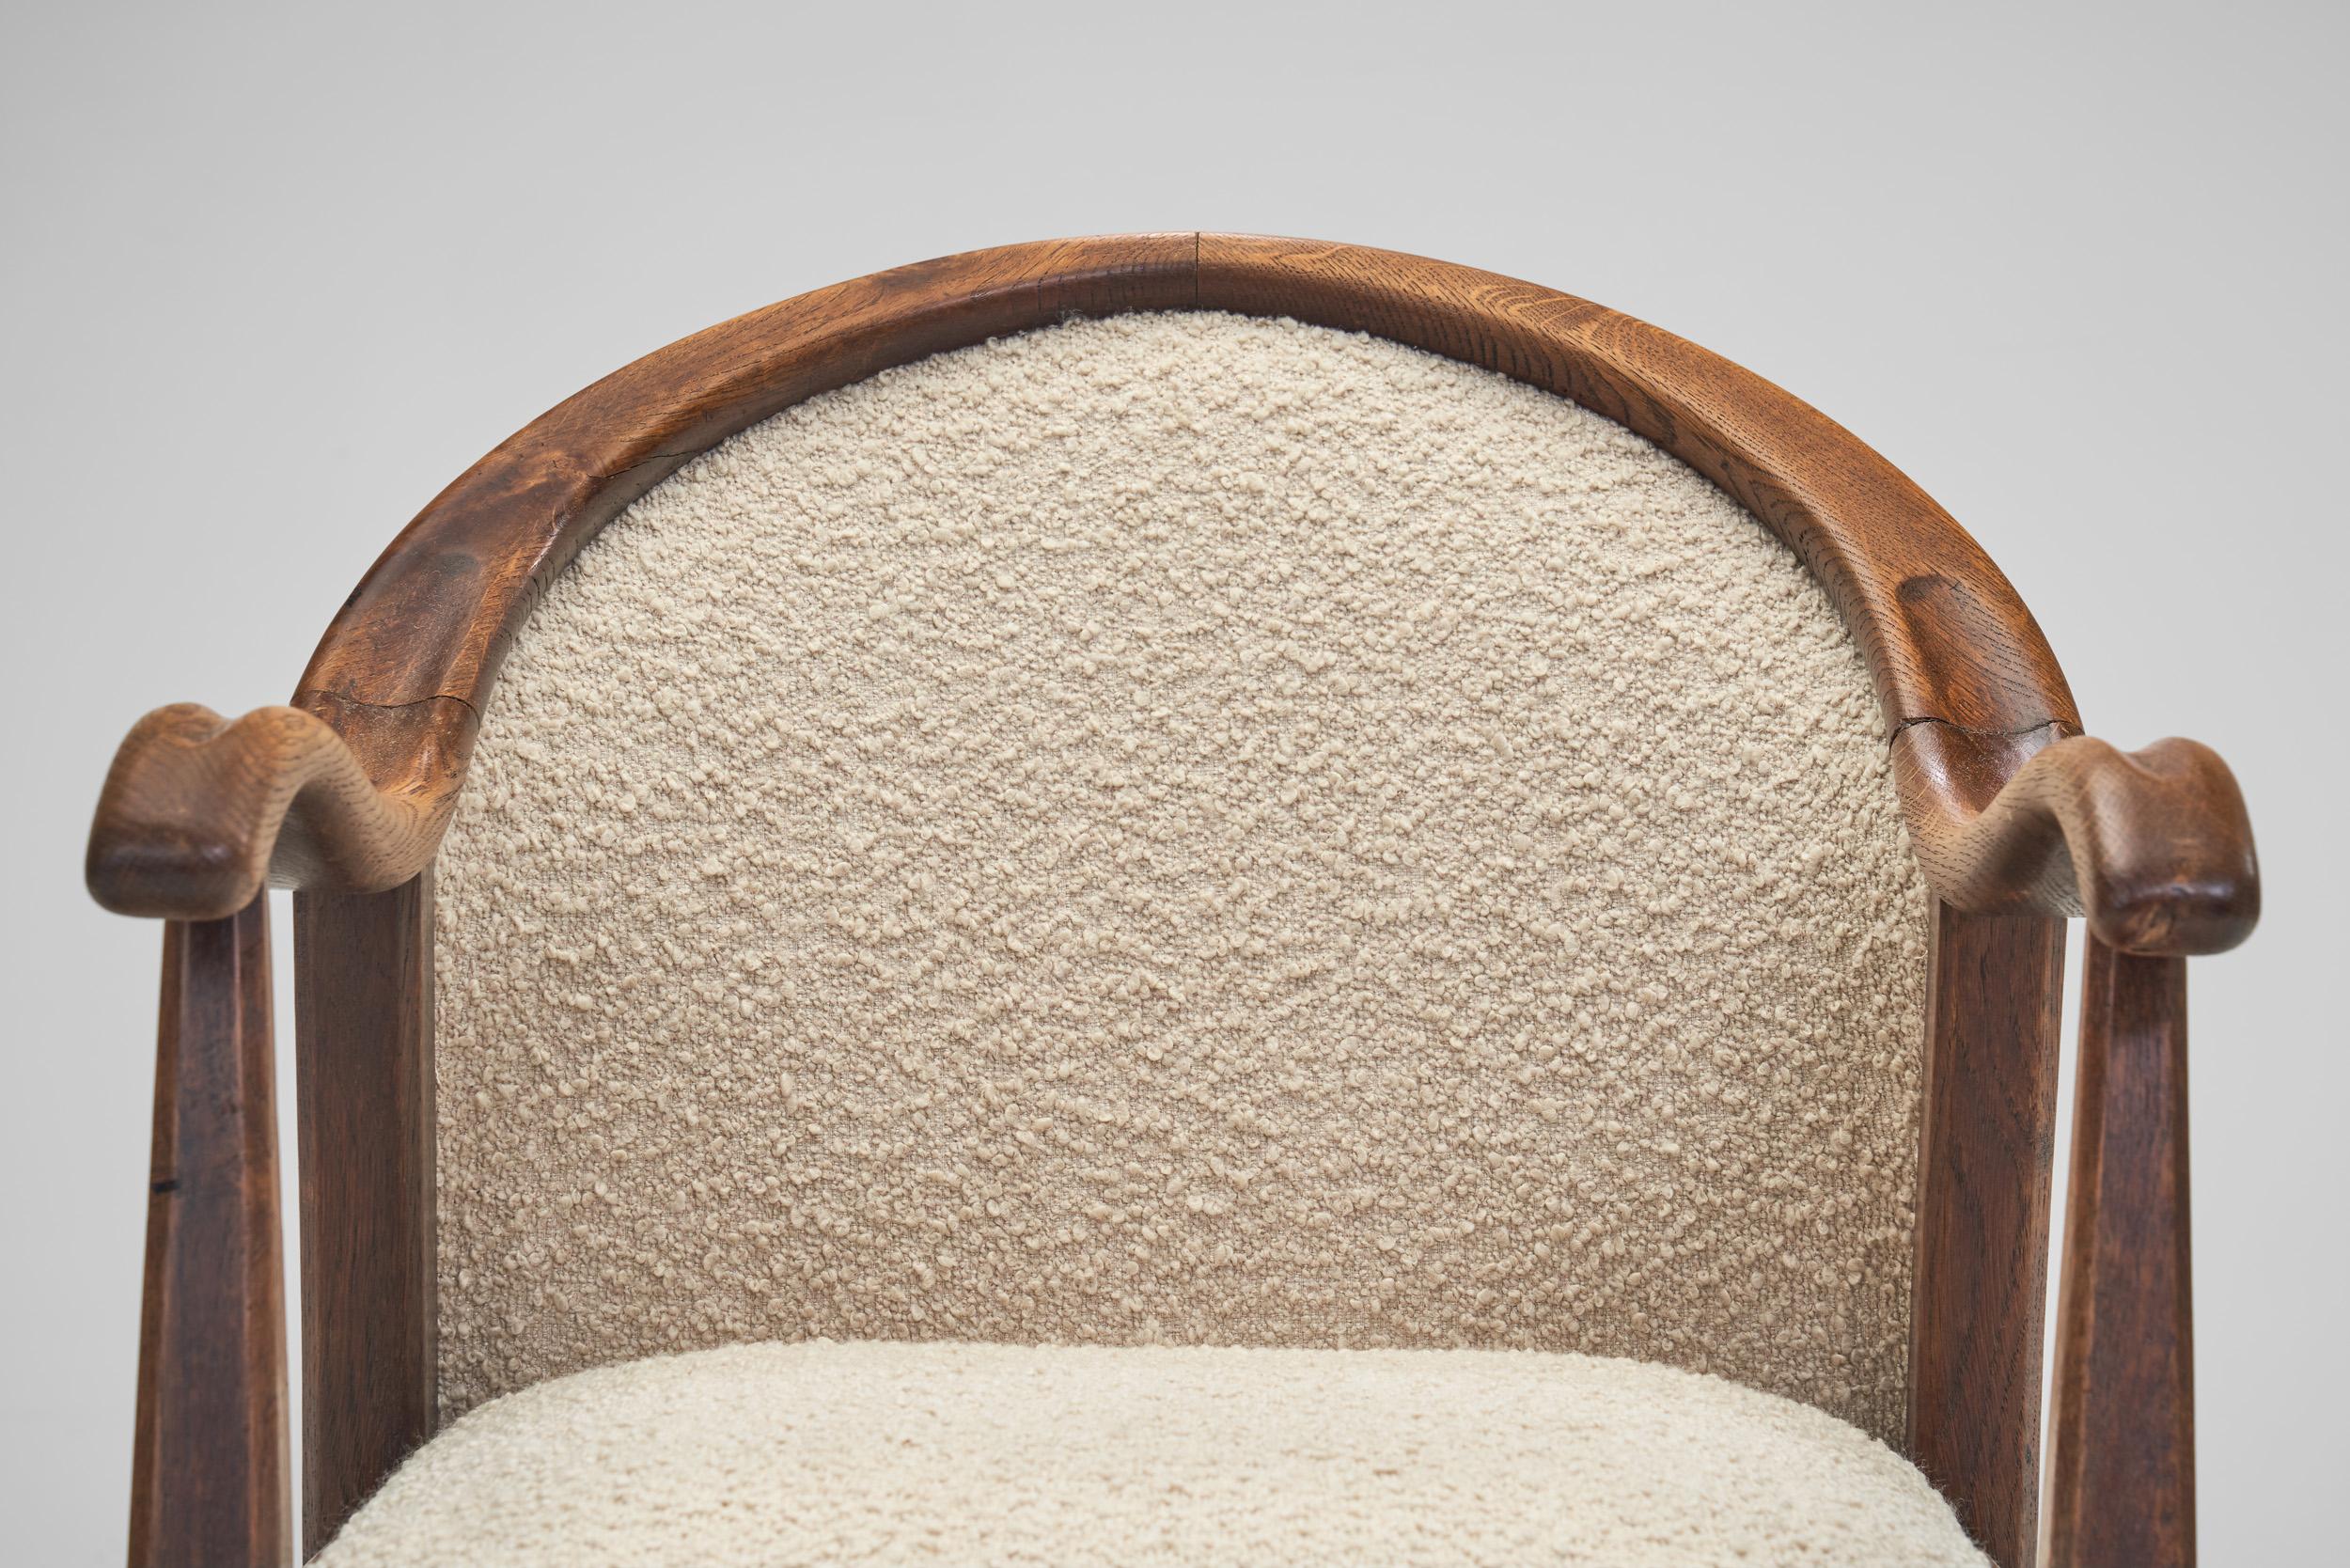 French Oak Art Deco Chairs in Taupe Bouclé, France 1930s For Sale 4